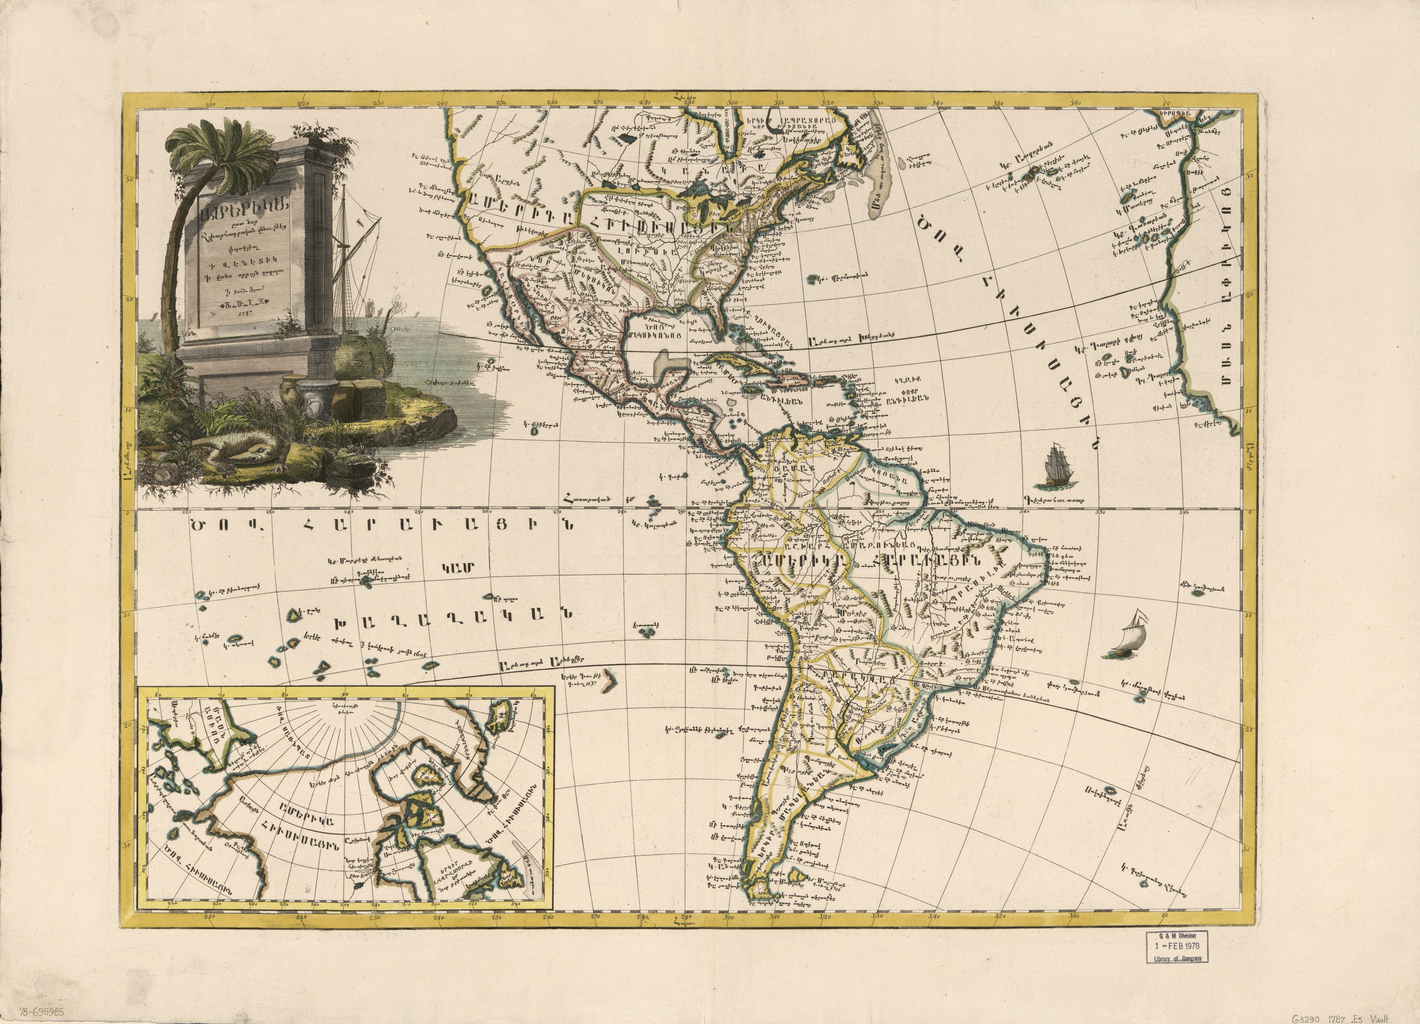 America According to New Geographical Explorations, a map printed by the Mekhitarist Congregation in Venice in 1787 (around twenty years before the Lewis and Clark Expedition)